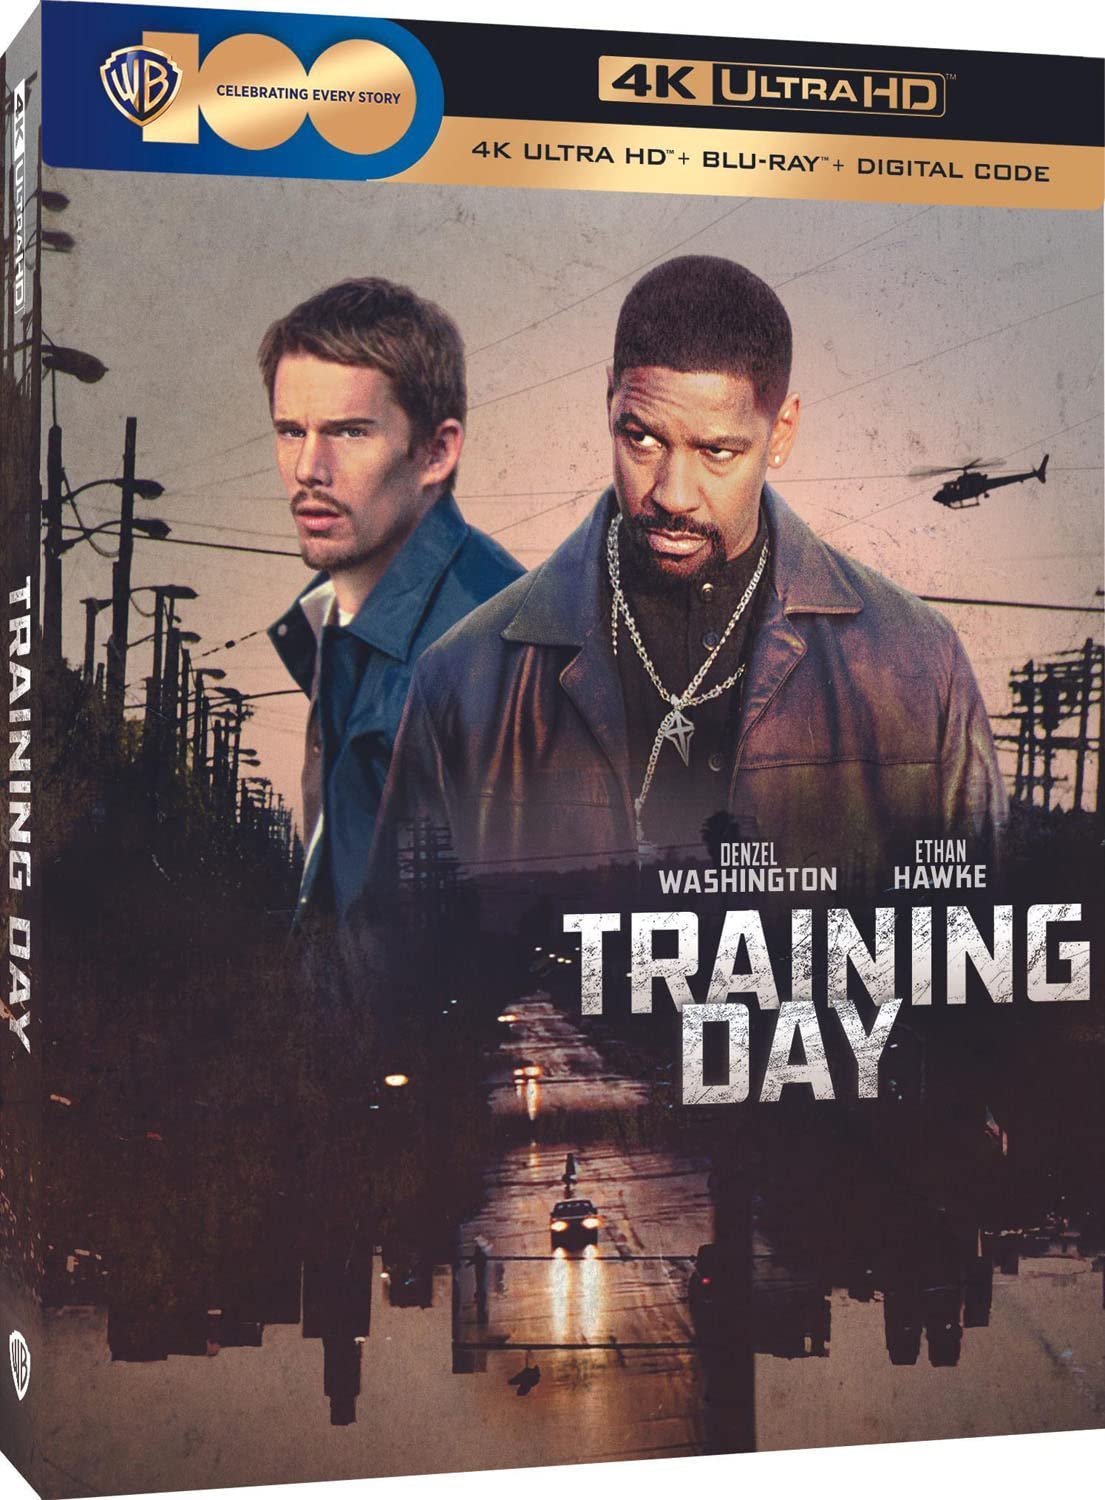 4k ultra hd blu-ray cover of the film "Training Day" featuring Denzel Washington and Ethan Hawke as undercover narcotics officers with a cityscape background. The Warner Bros logo is visible at the bottom.
Product Name: Training Day (4K Ultra HD + Blu-ray + Digital) [4K UHD]
Brand Name: Warner Bros